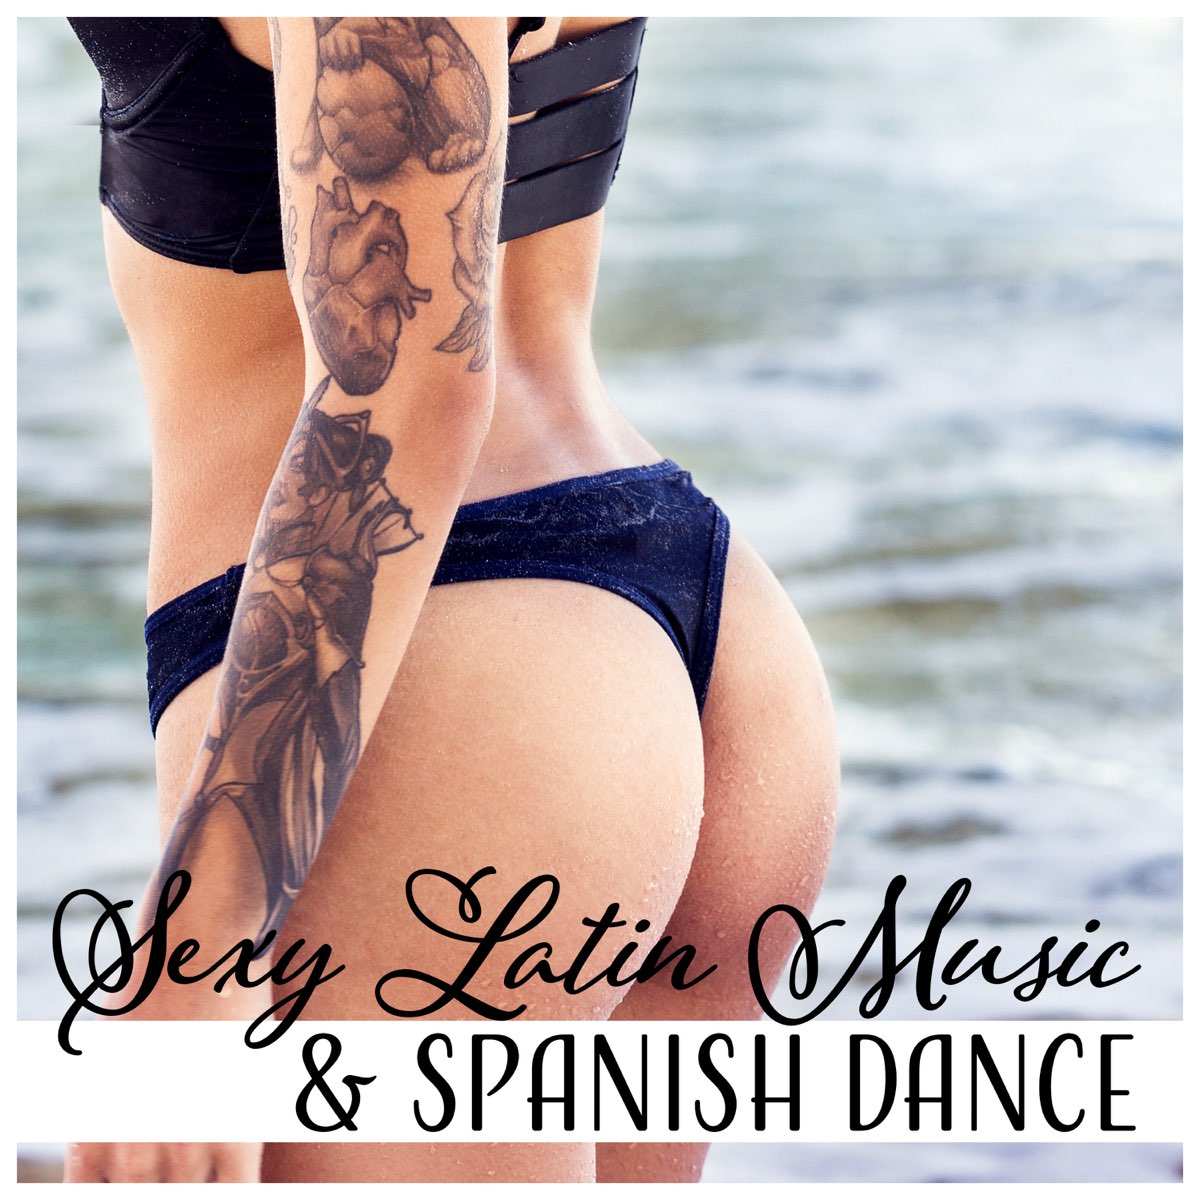 Spanish Rhythms to Get You In the Mood: Download MP3s Today